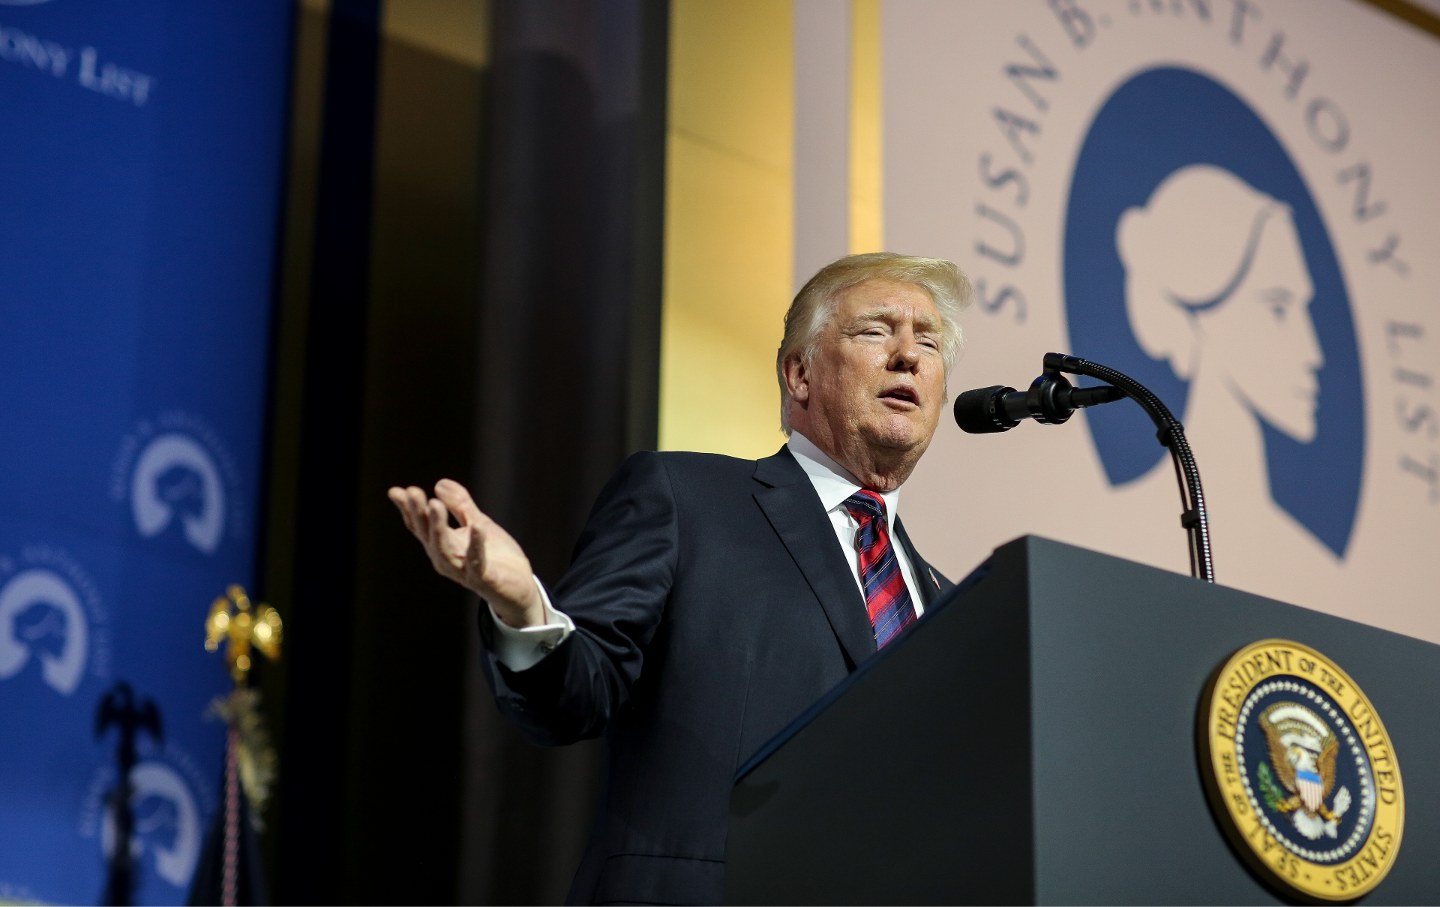 President Donald Trump at a lectern in front of a large poster depicting the logo and name of the Susan B. Anthony List.